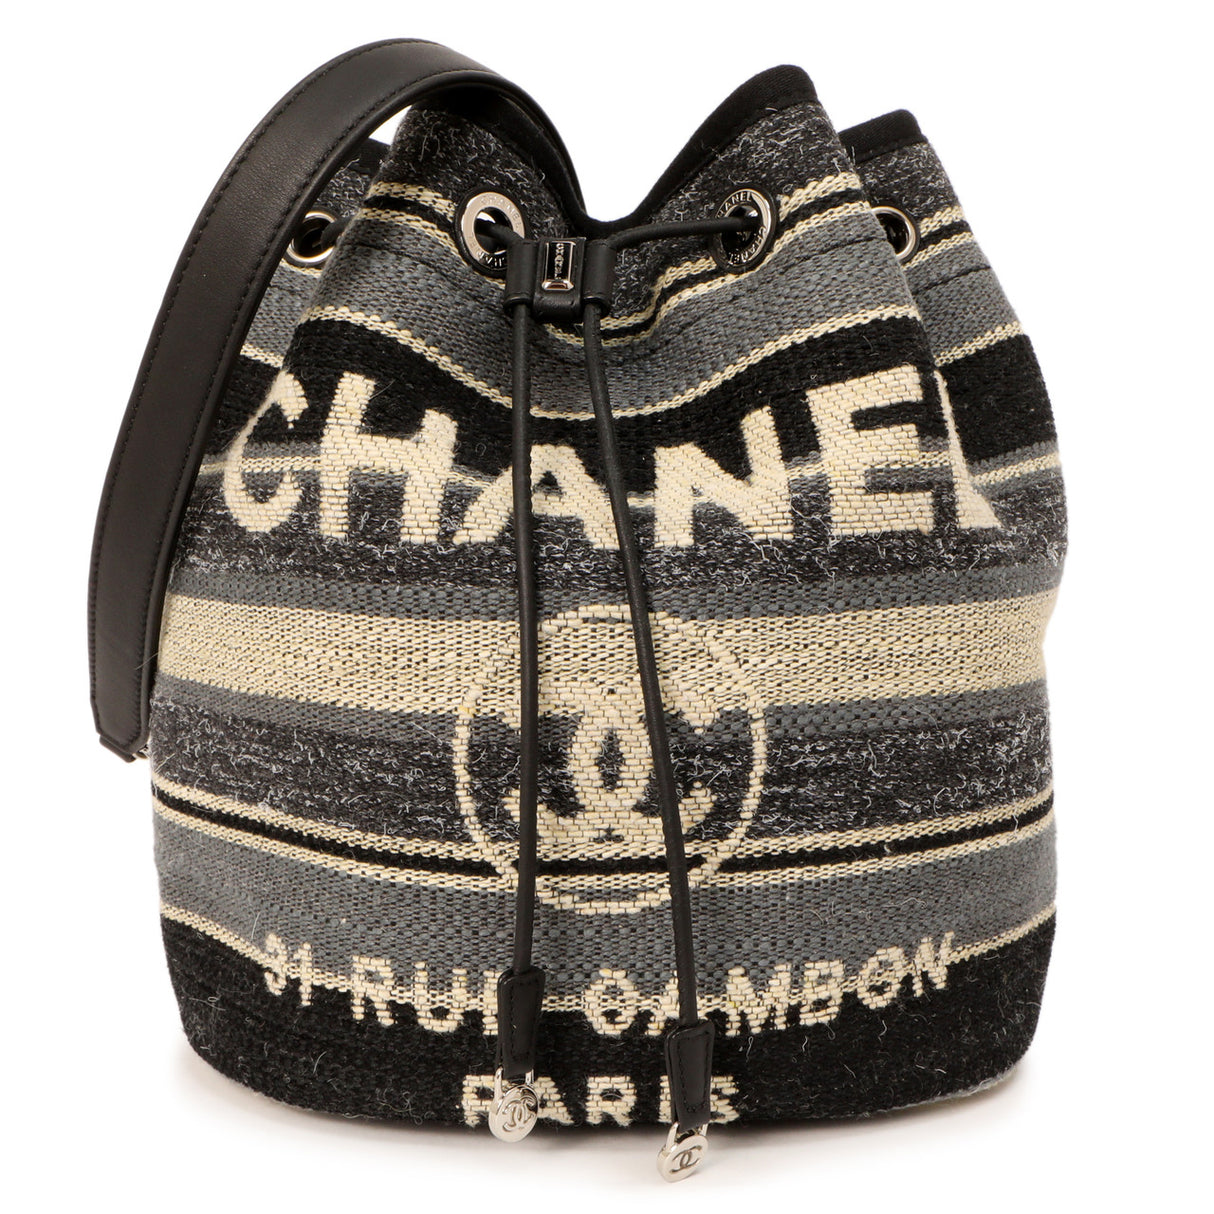 Chanel Striped Canvas Deauville Drawstring Bucket Bag